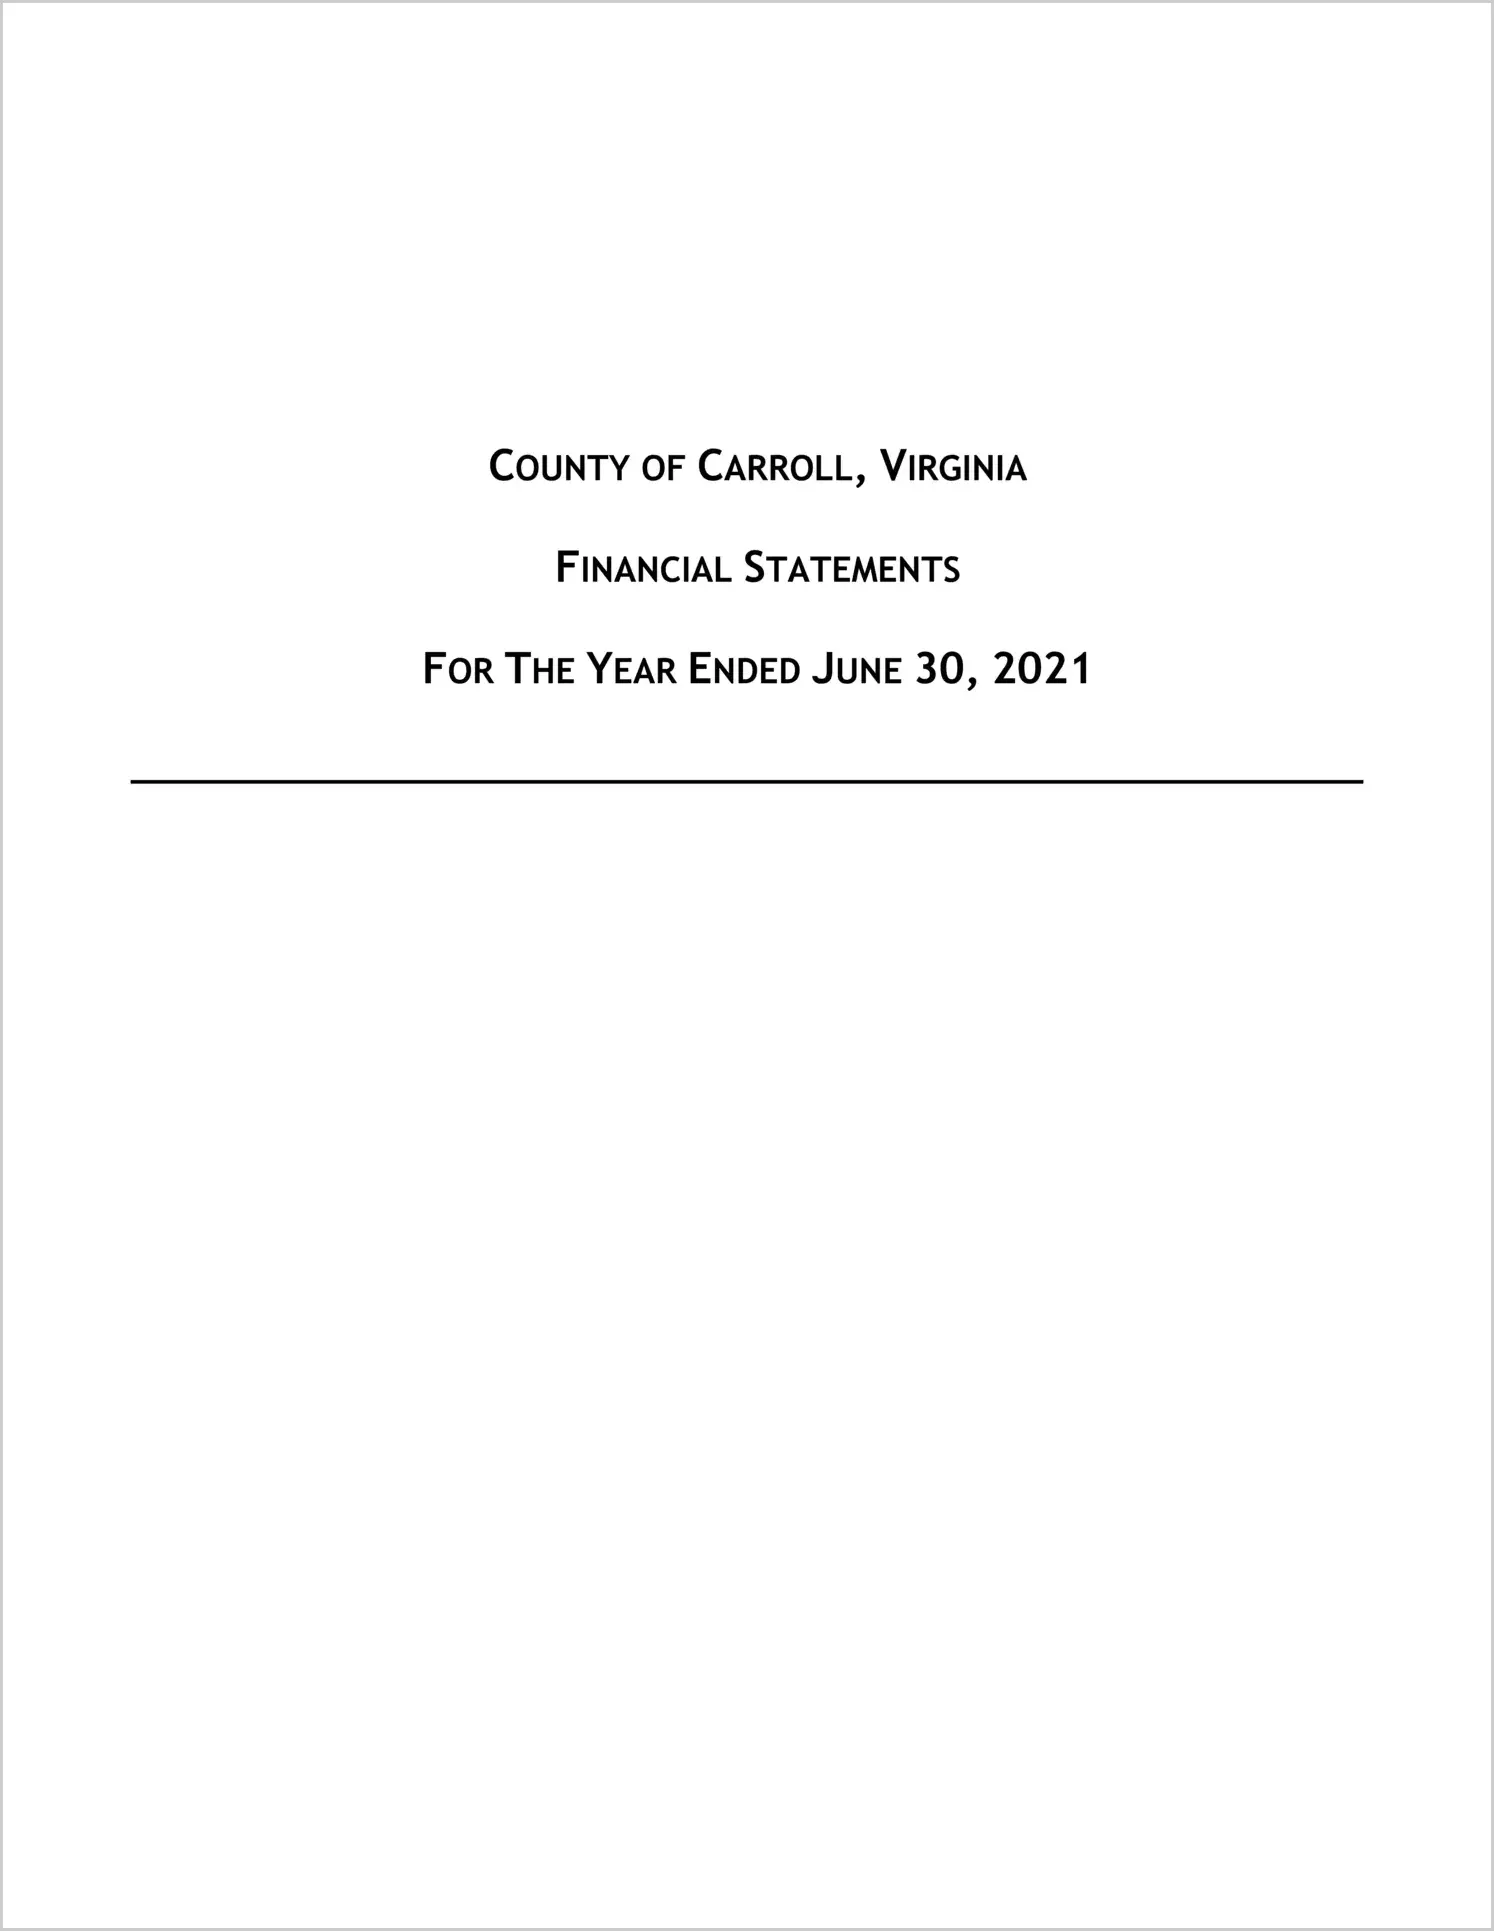 2021 Annual Financial Report for County of Carroll